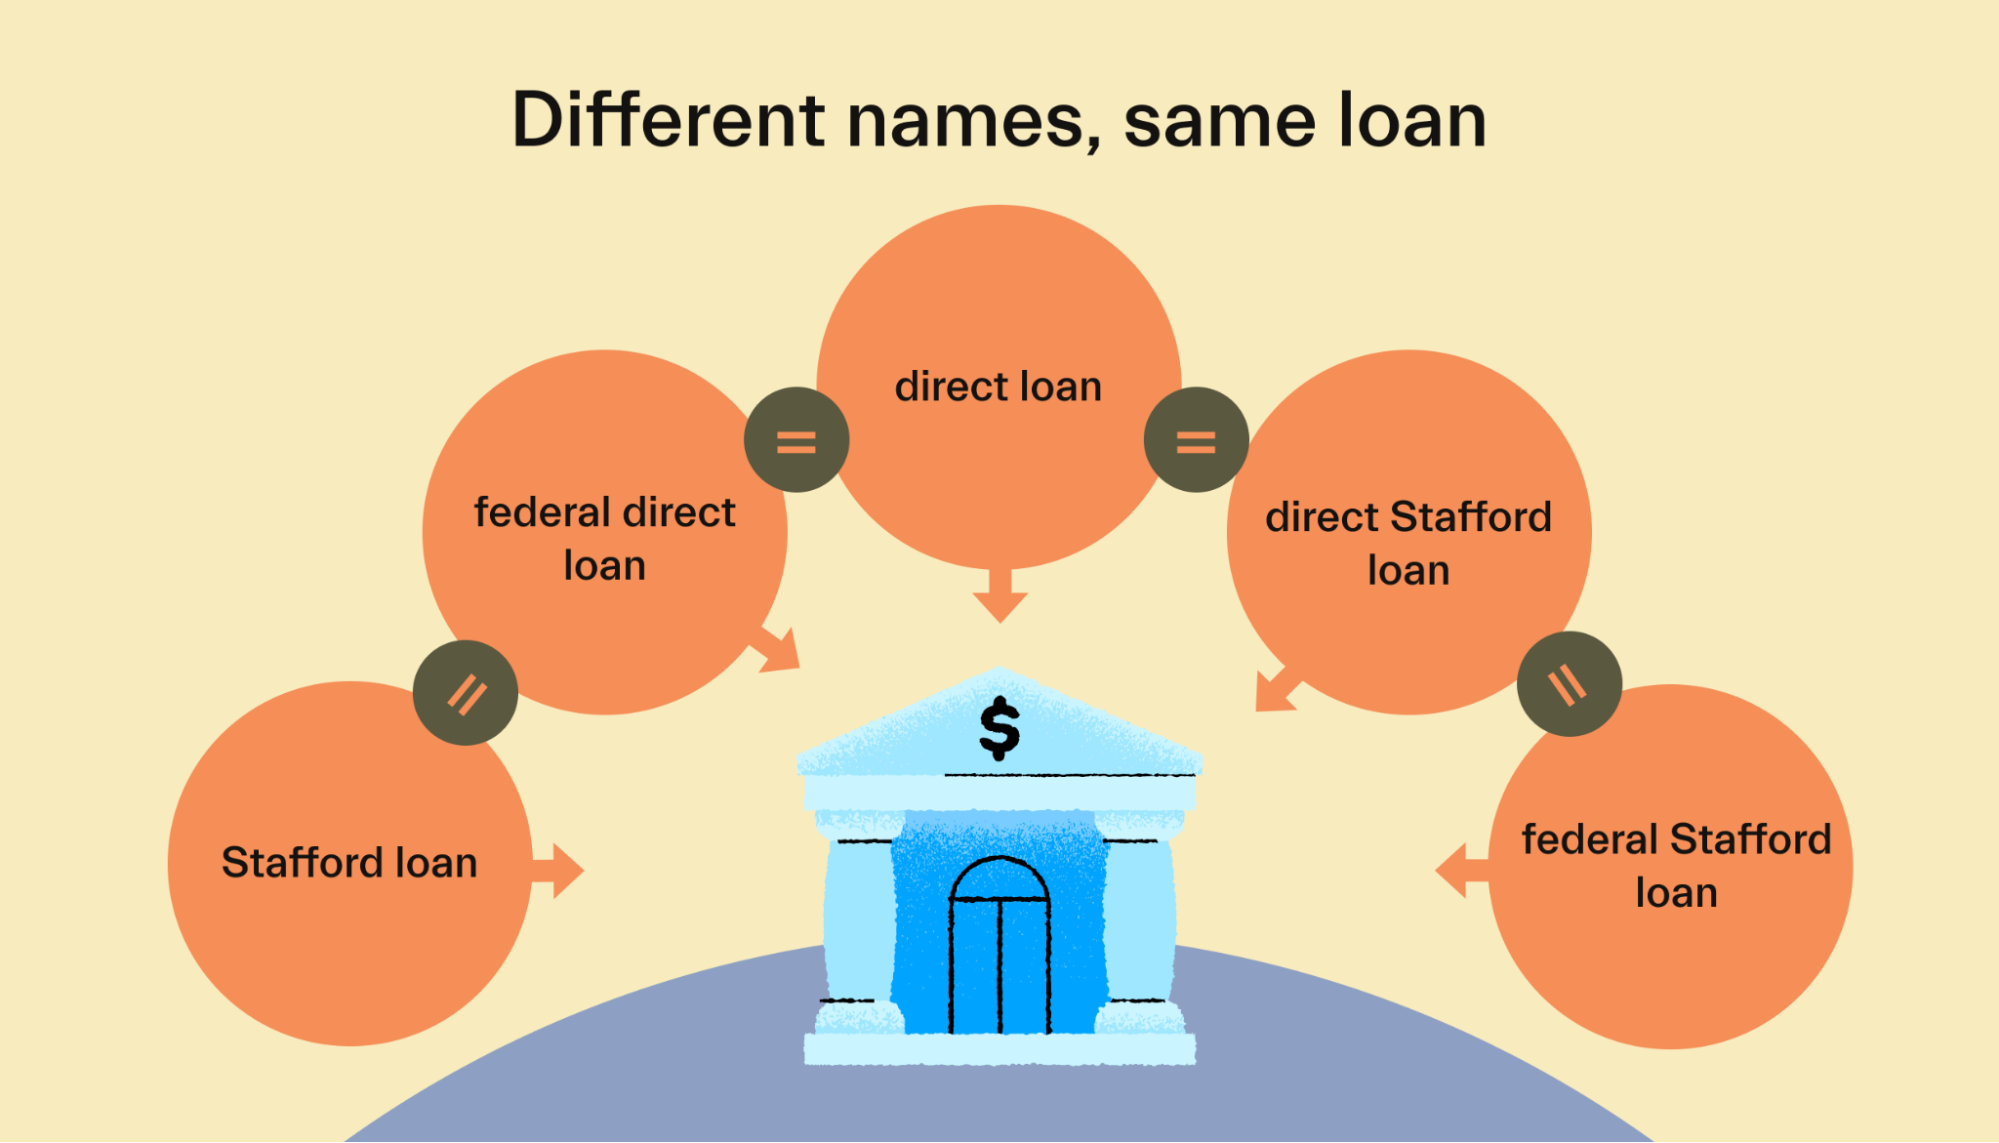 Same loan, different names